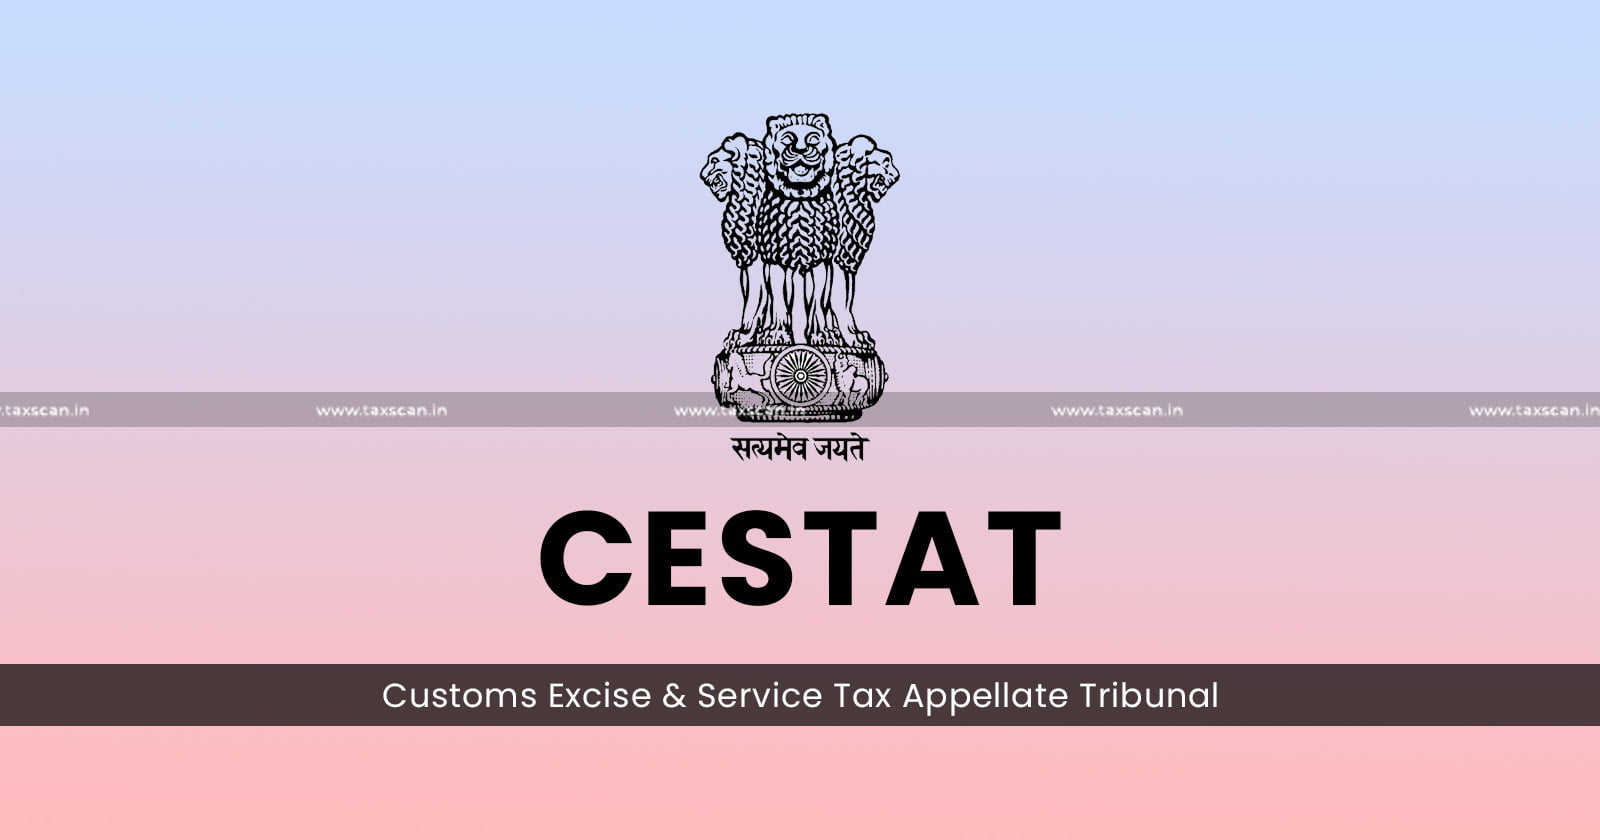 Appliance Calibration Test - Customised Upgradation - Configuration Service of Appliances - Manufacture - Central Excise Duty - Excise Duty - New Product - Different Name - Character - Use - CESTAT - taxscan